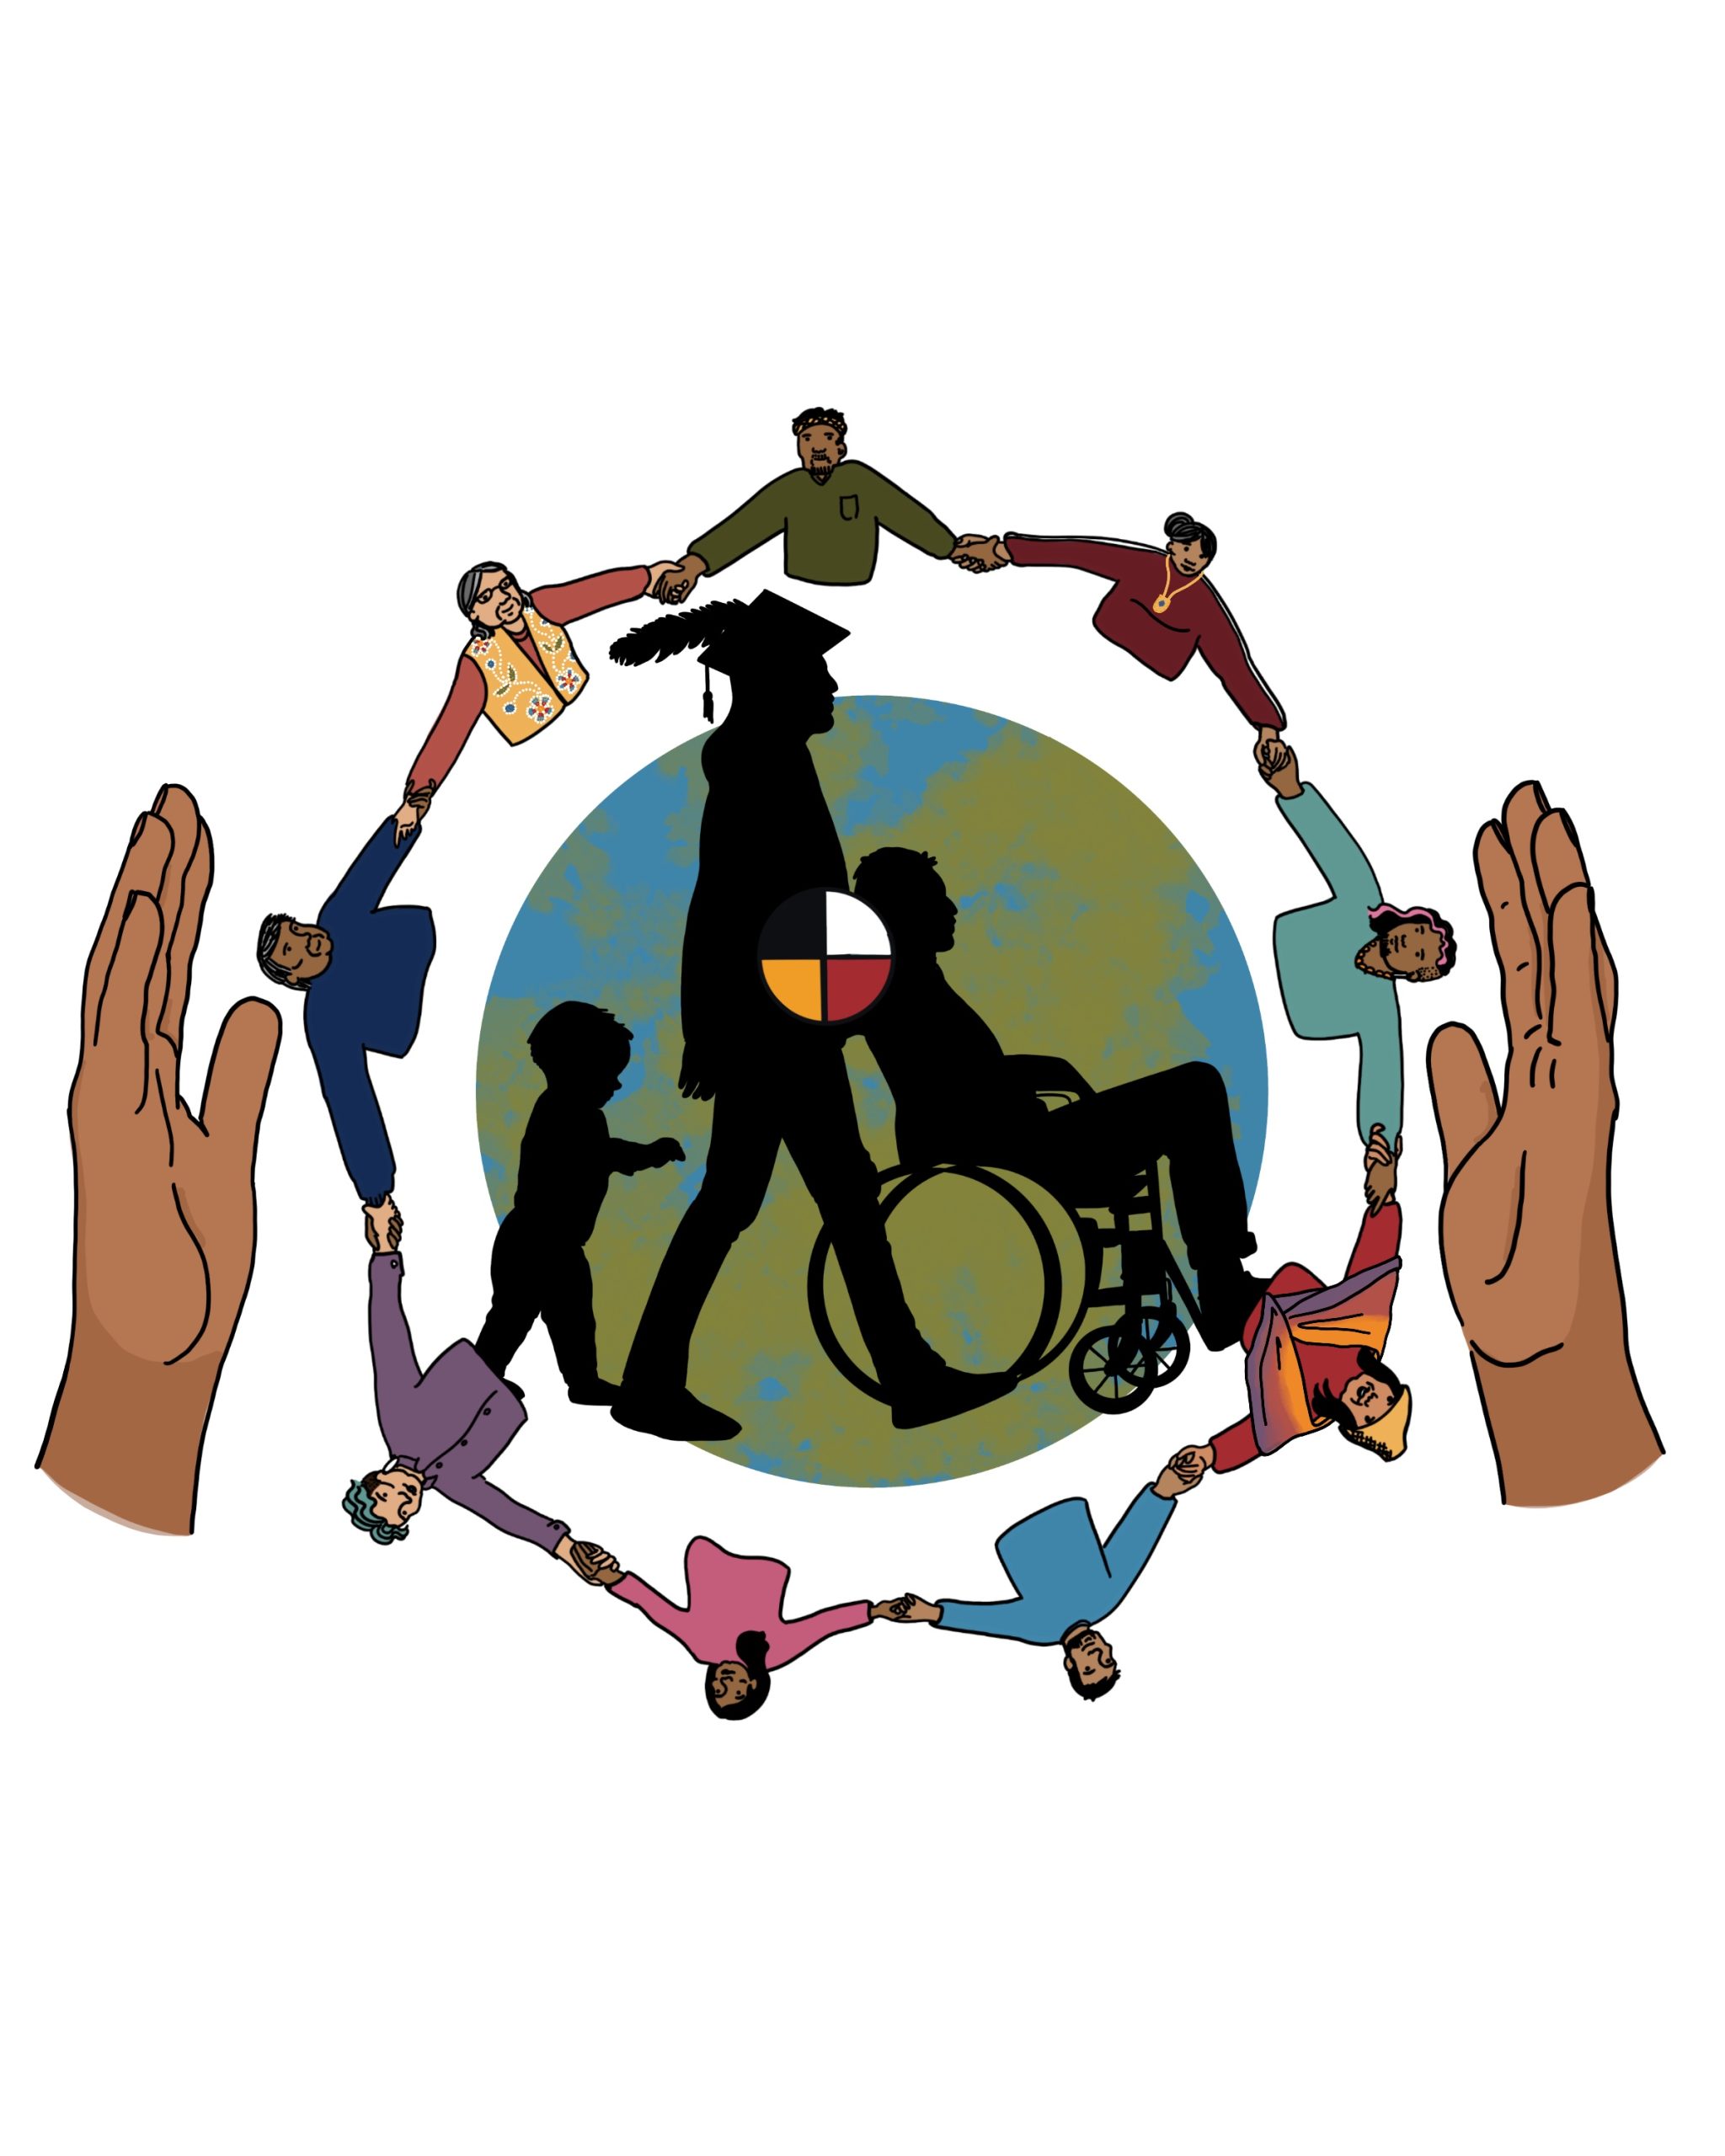 Silhouettes of a graduating student, a student in a wheelchair, and a baby are surrounded by a circle of community members.